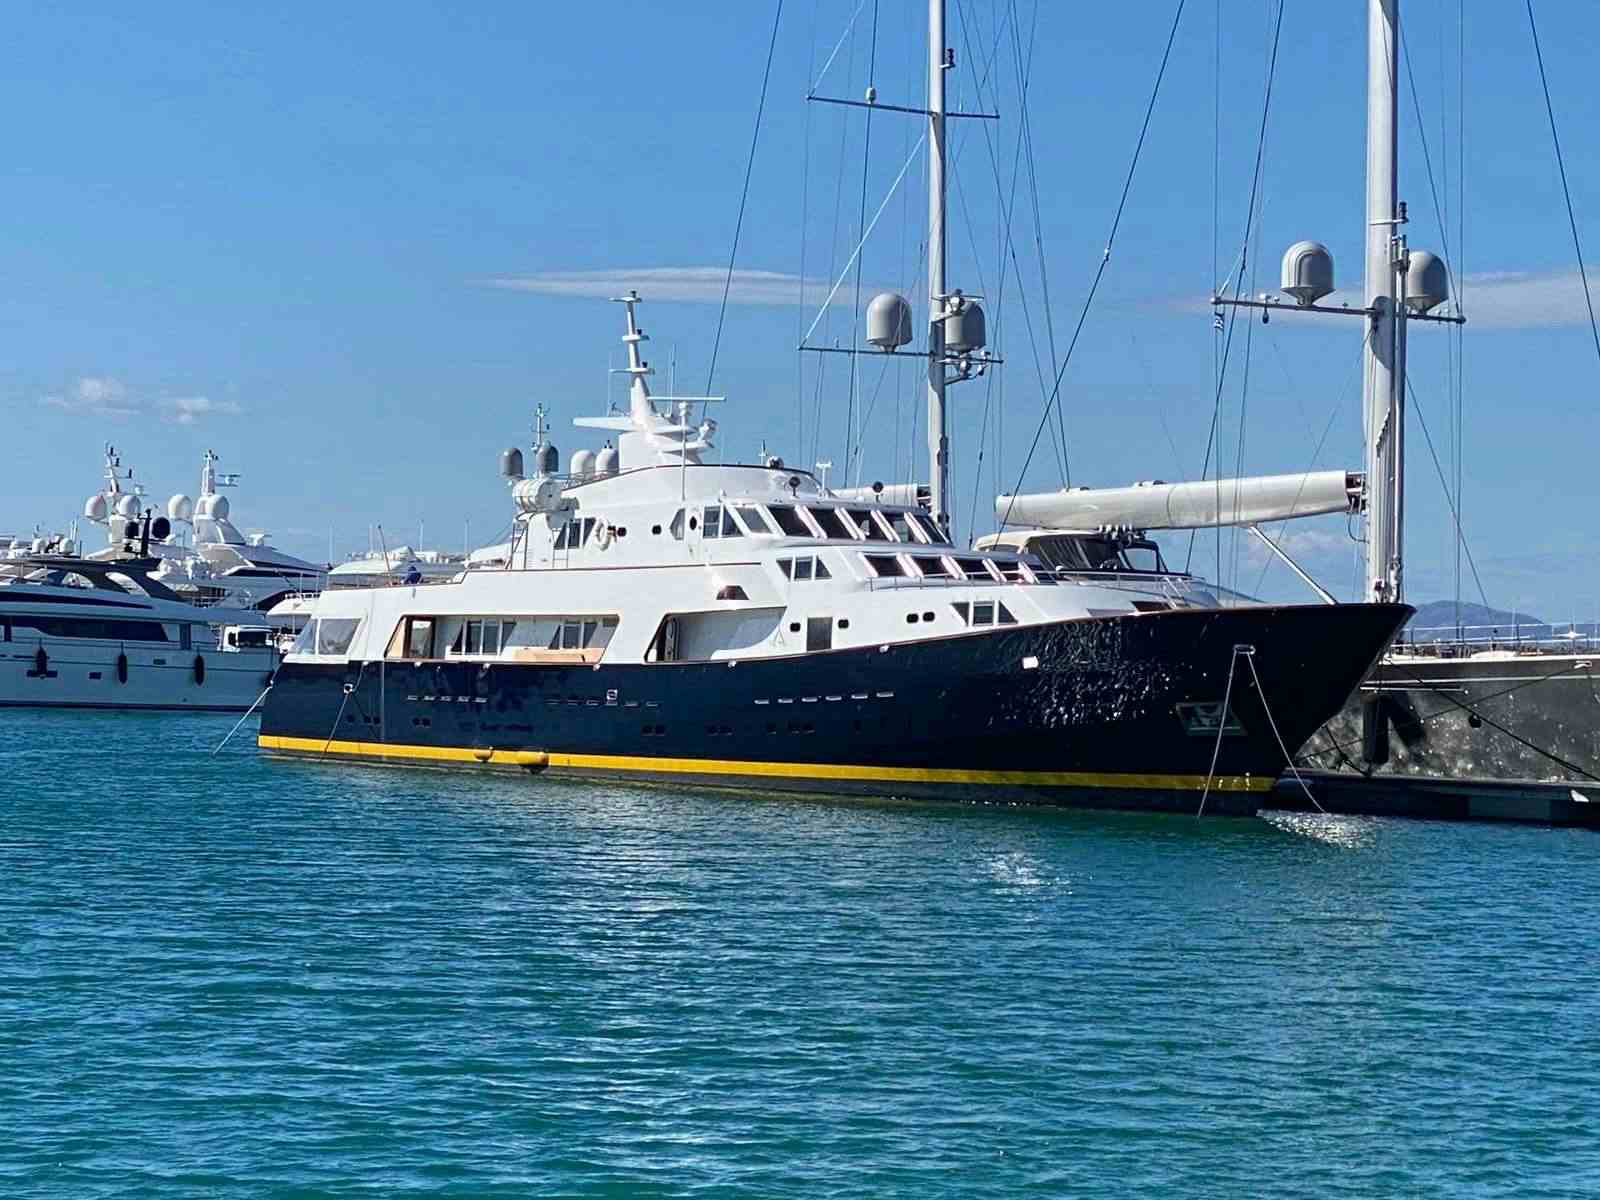 SOMETHING COOL - Yacht Charter Eden Island & Boat hire in Summer: W. Med -Naples/Sicily, Greece, W. Med -Riviera/Cors/Sard., Turkey, W. Med - Spain/Balearics, Croatia | Winter: Indian Ocean and SE Asia, Red Sea, United Arab Emirates 1